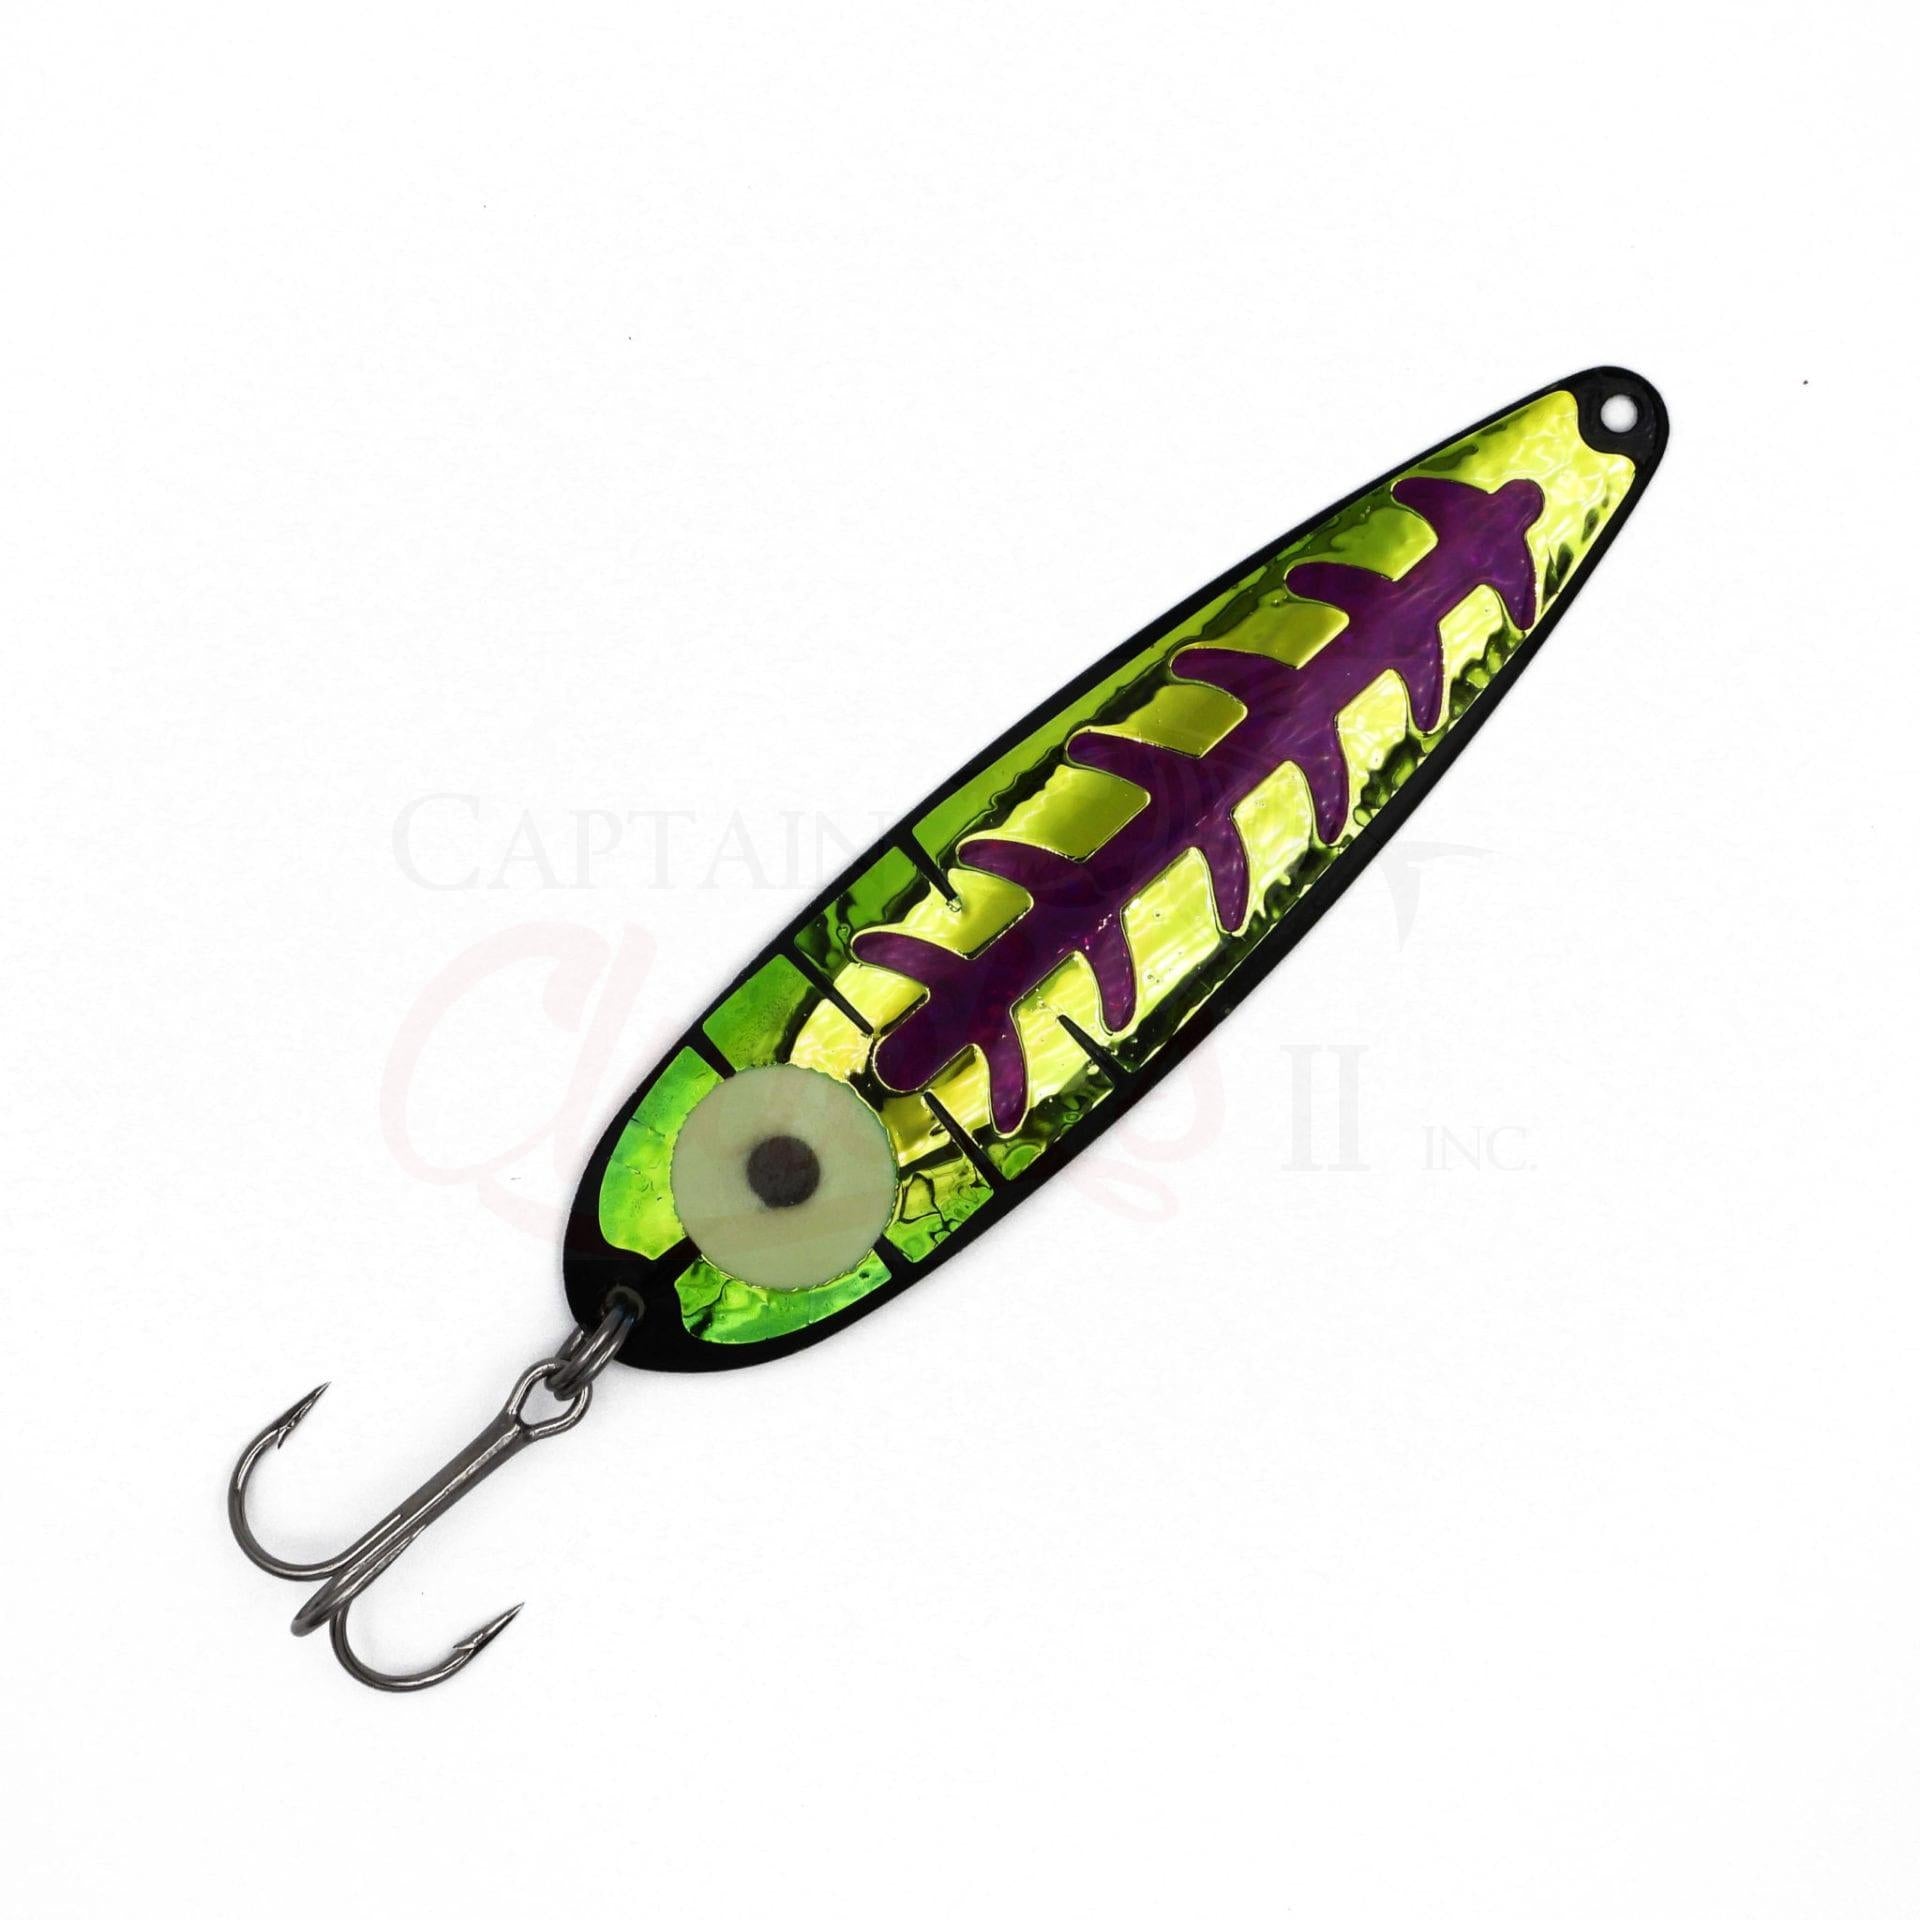 Moonshine Lures RV Series Spoon - Green Jeans